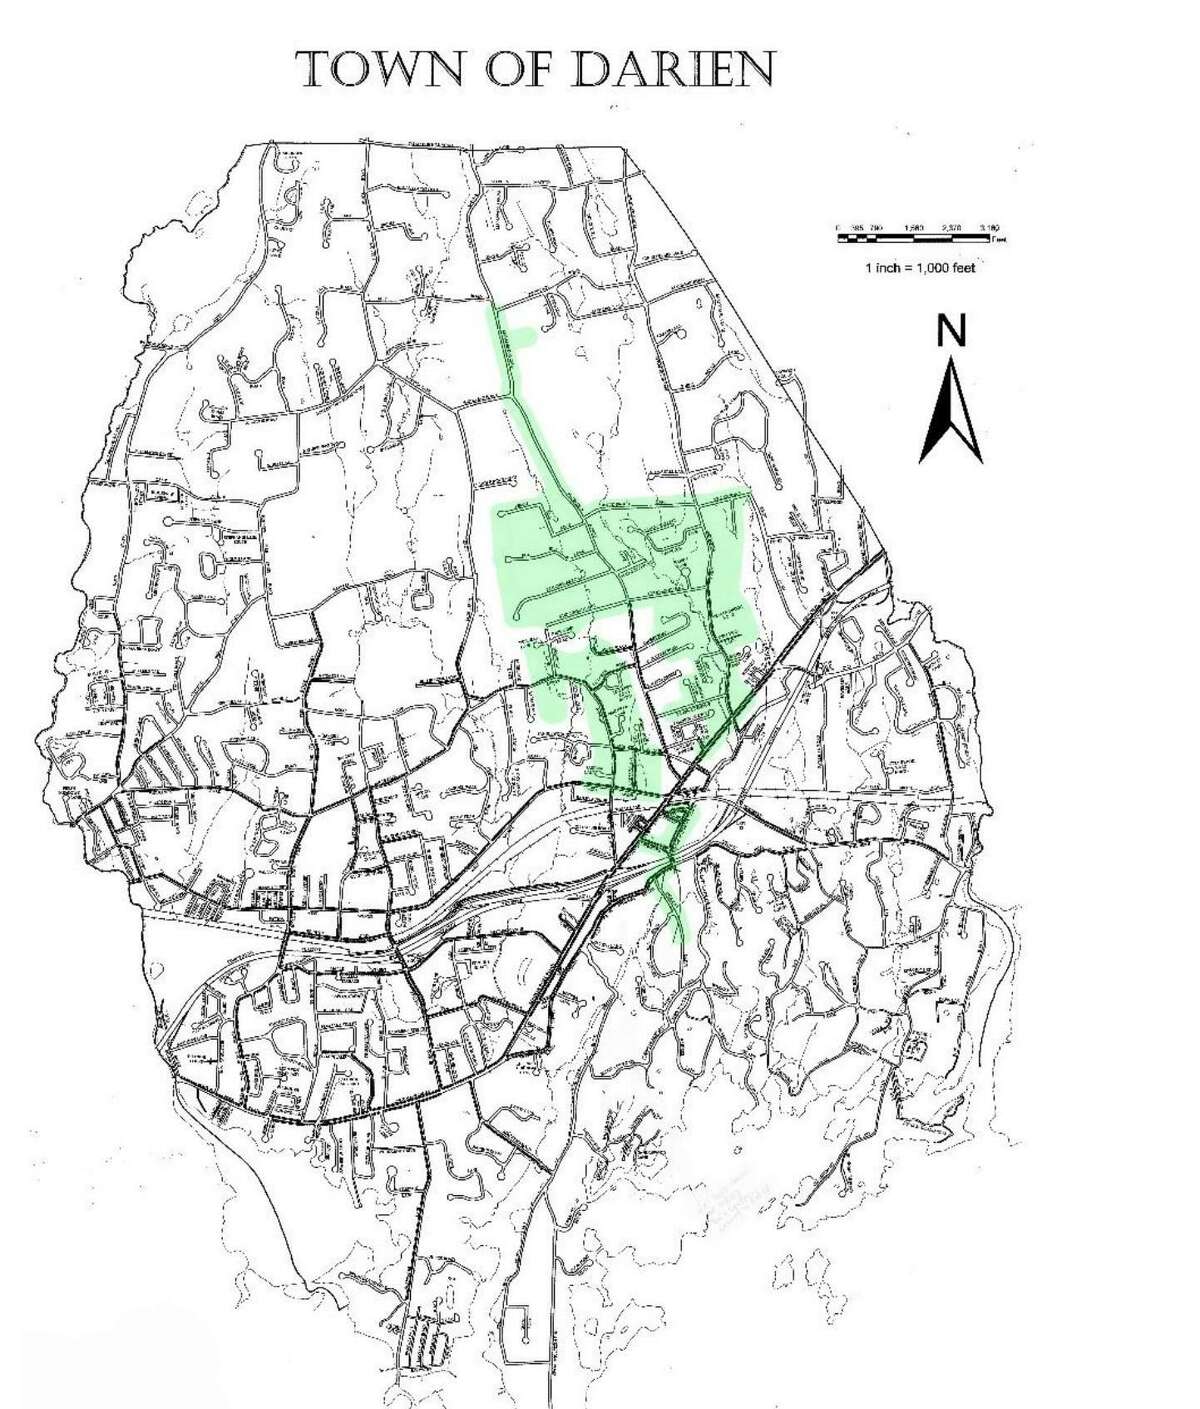 The areas highlighted in green will experience the dye testing conducted by the Department of Public Works.